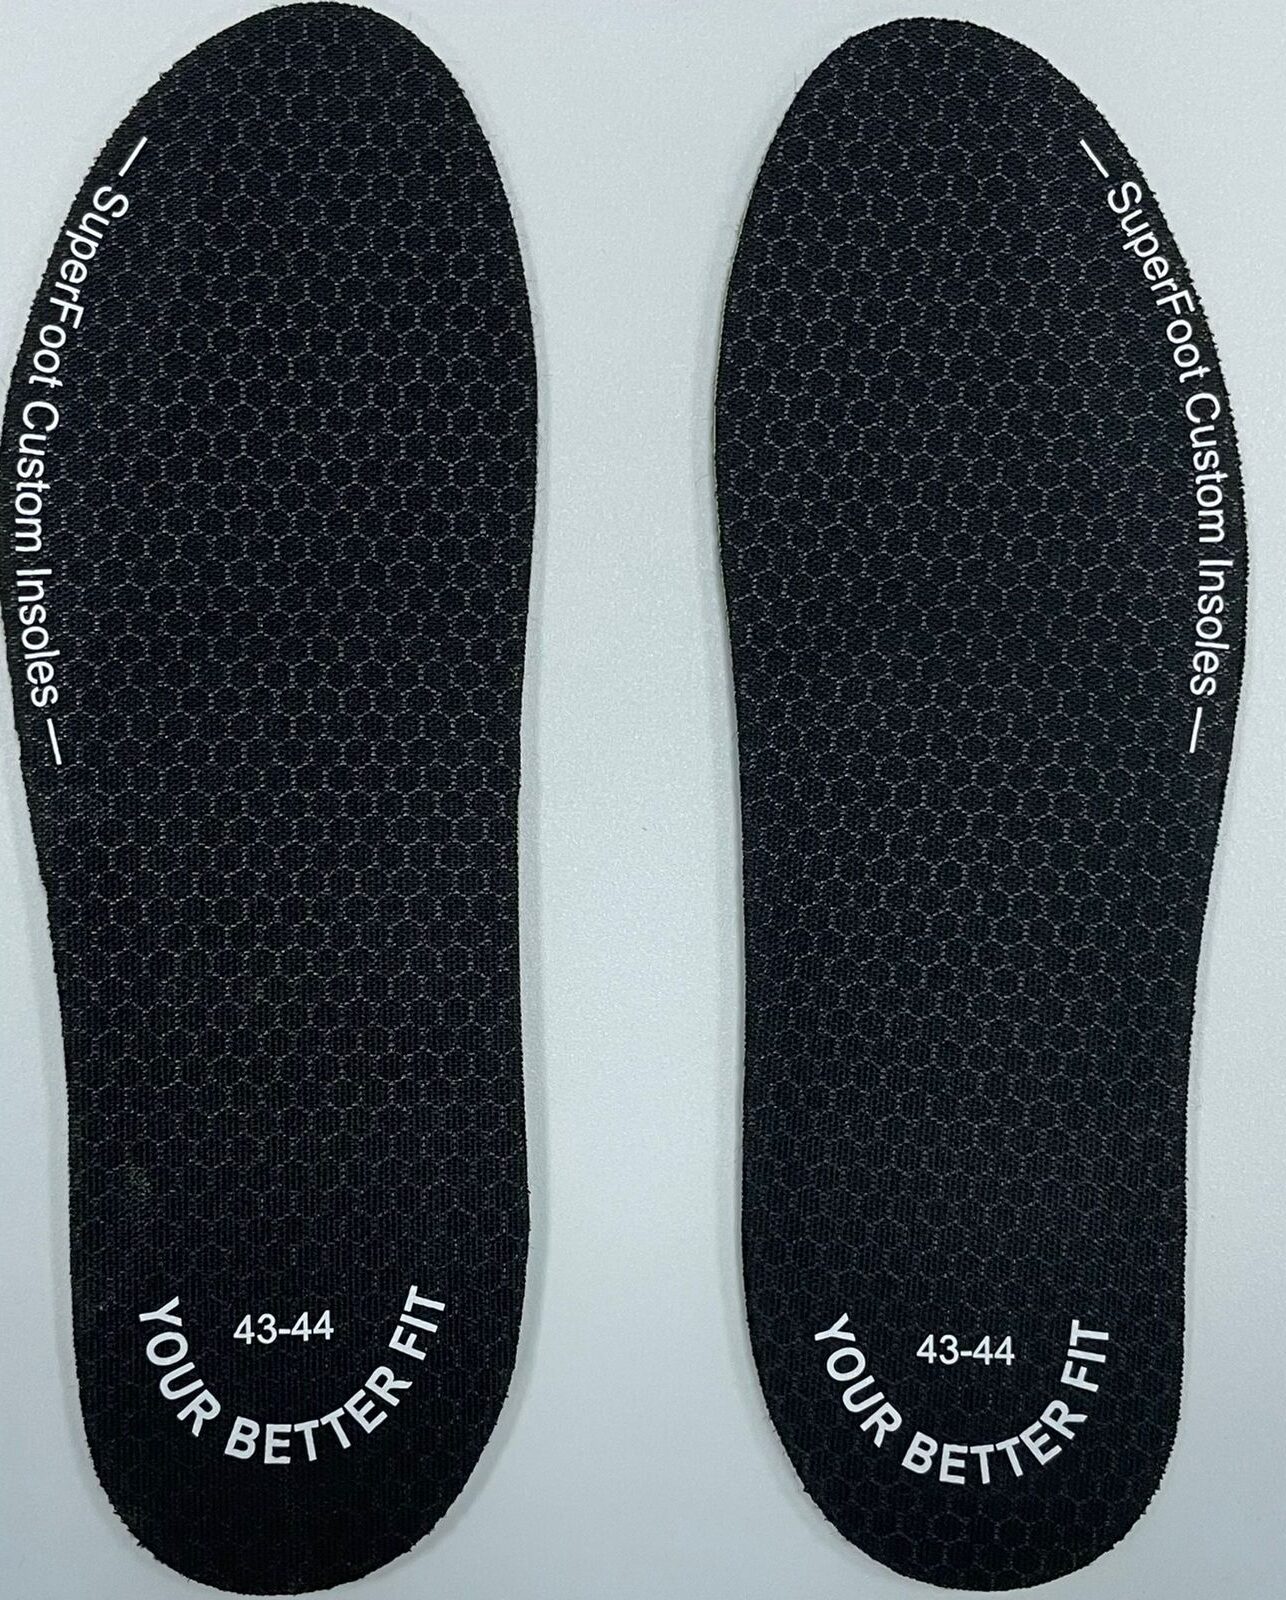 Formal Shoes Insoles - Superfoot